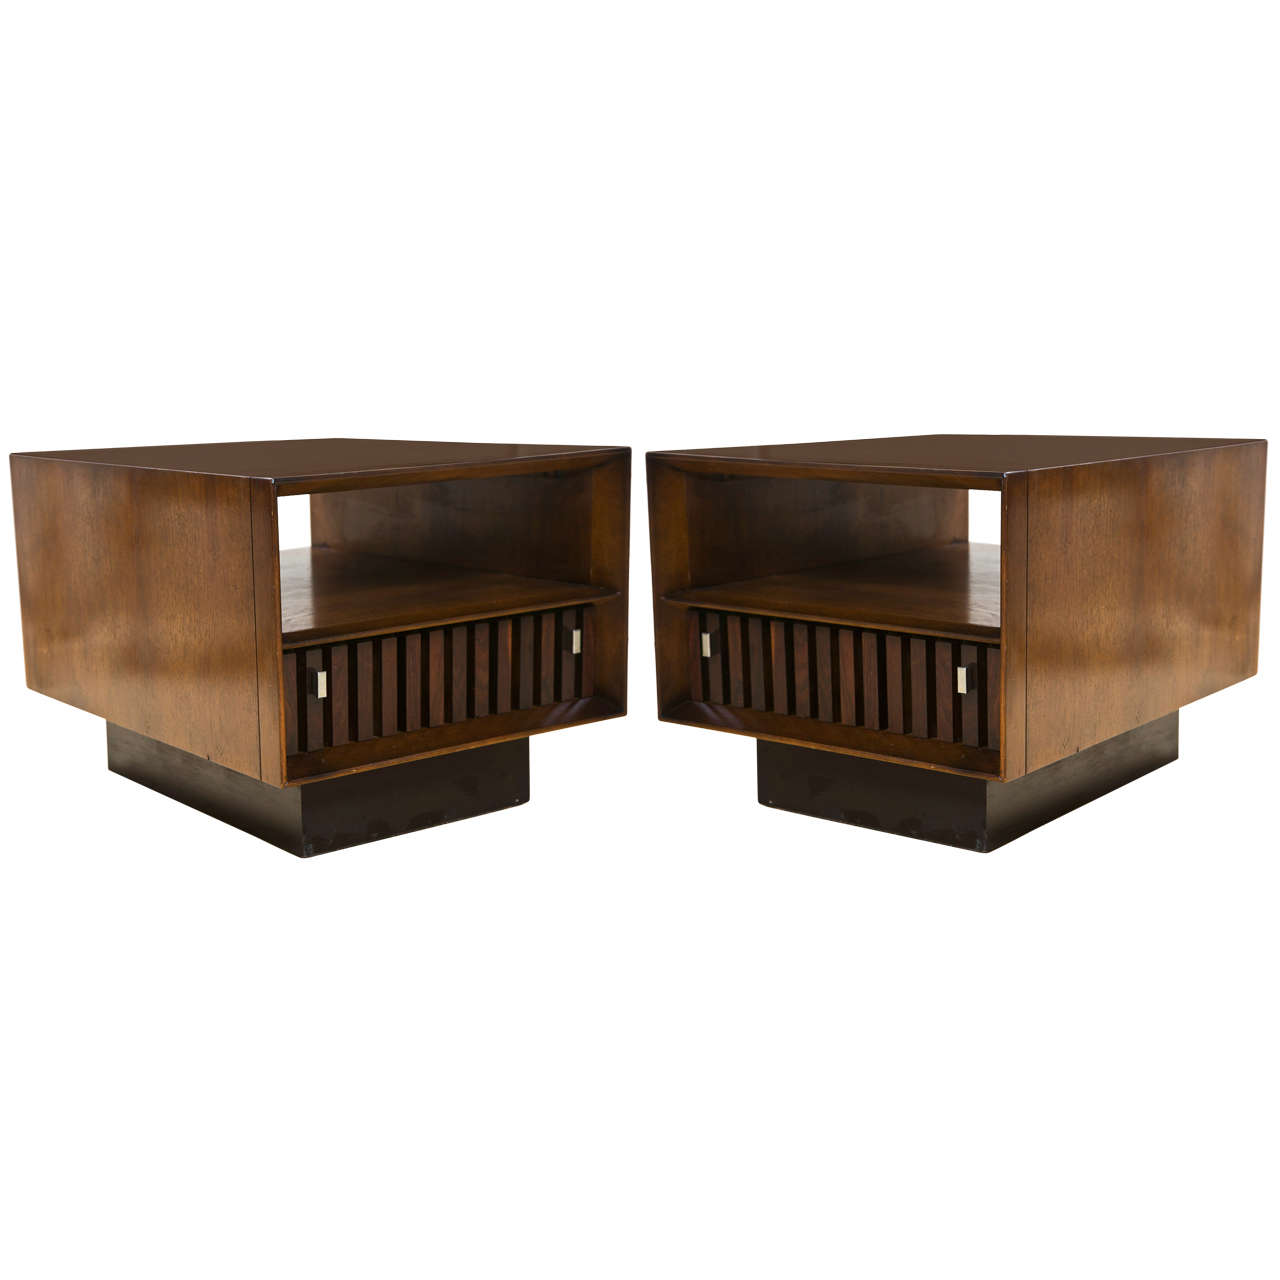 Pair of Mid Century Modern End Tables in Oak with Rosewood Inlay For Sale